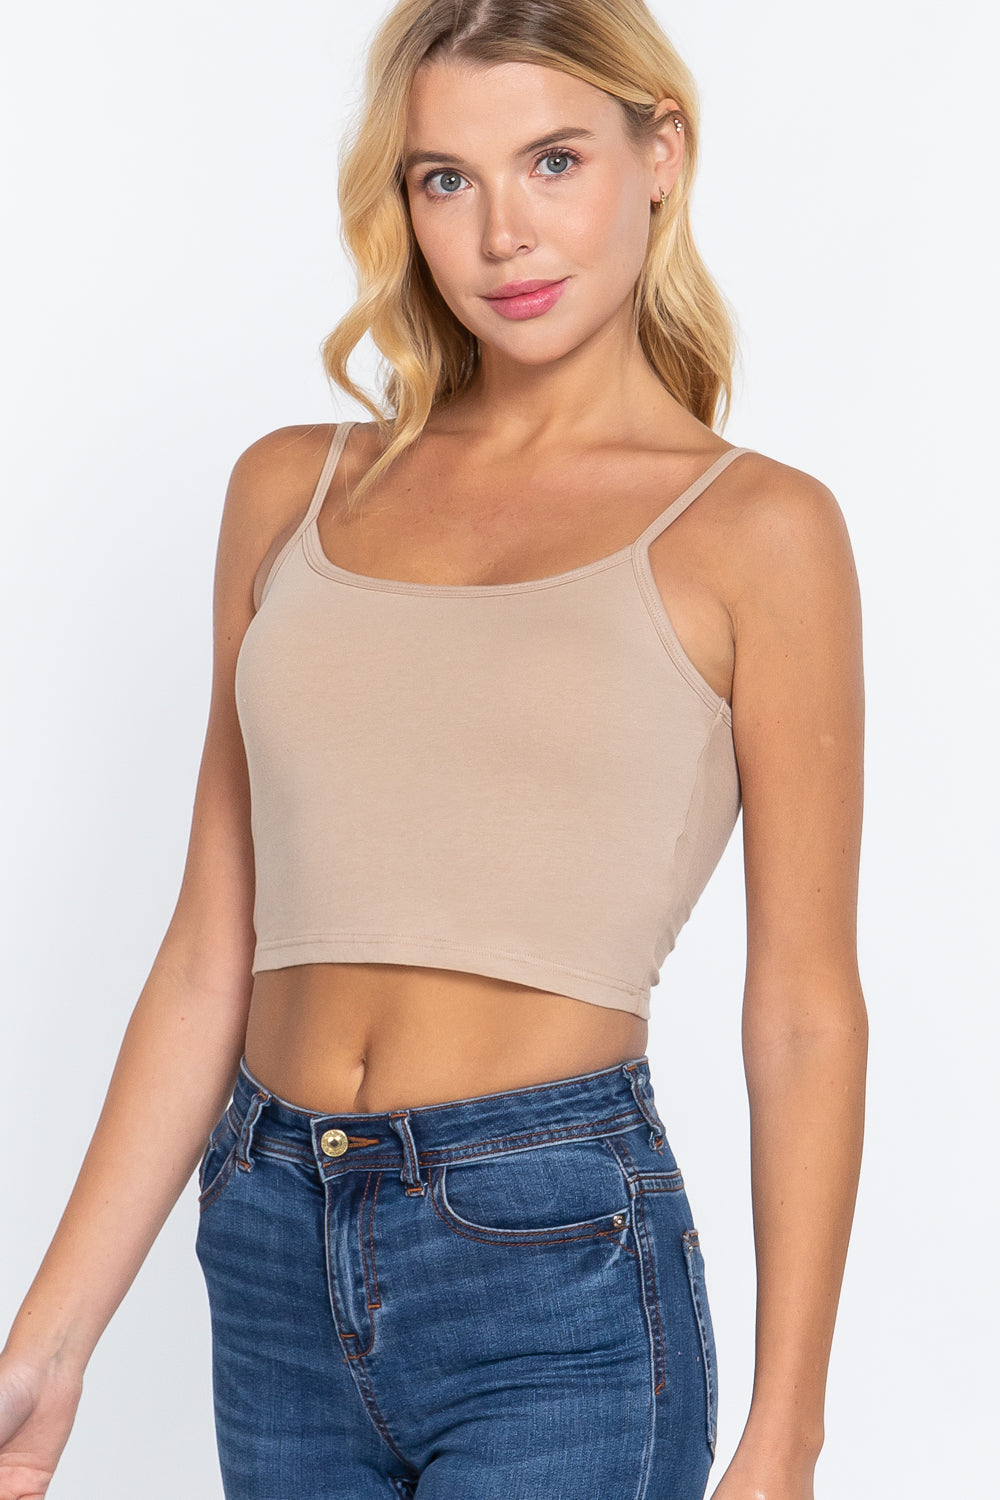 Round Neck W/removable Bra Cup Cotton Spandex Bra Taupe Top Shirts & Tops jehouze 